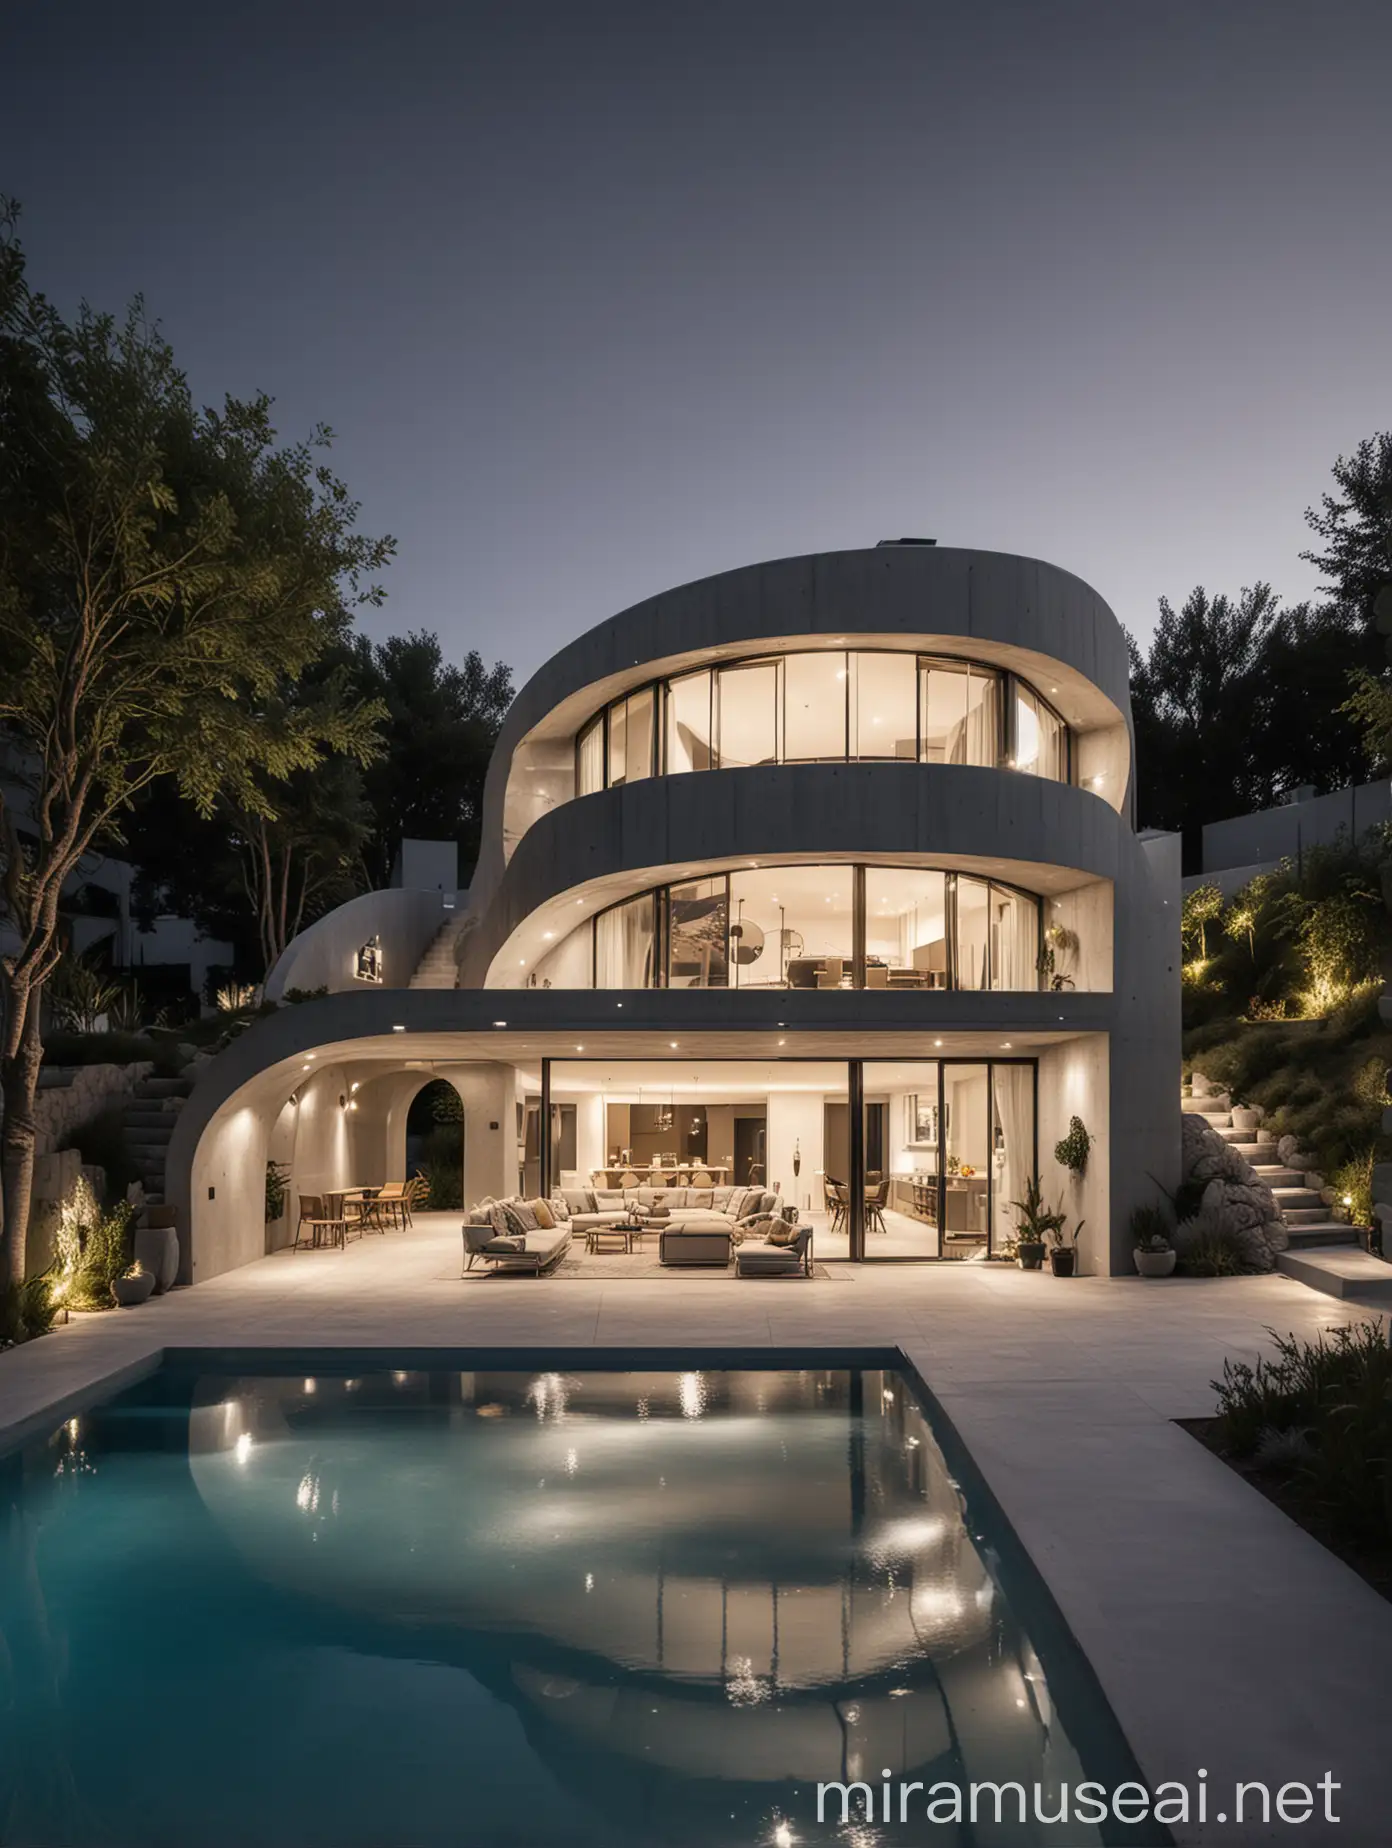 A modern, duplex grey concrete prefabricated house with a pool, semi-circular arched design, terrace, creative lighting, and innovative design approved by an architectural competition.